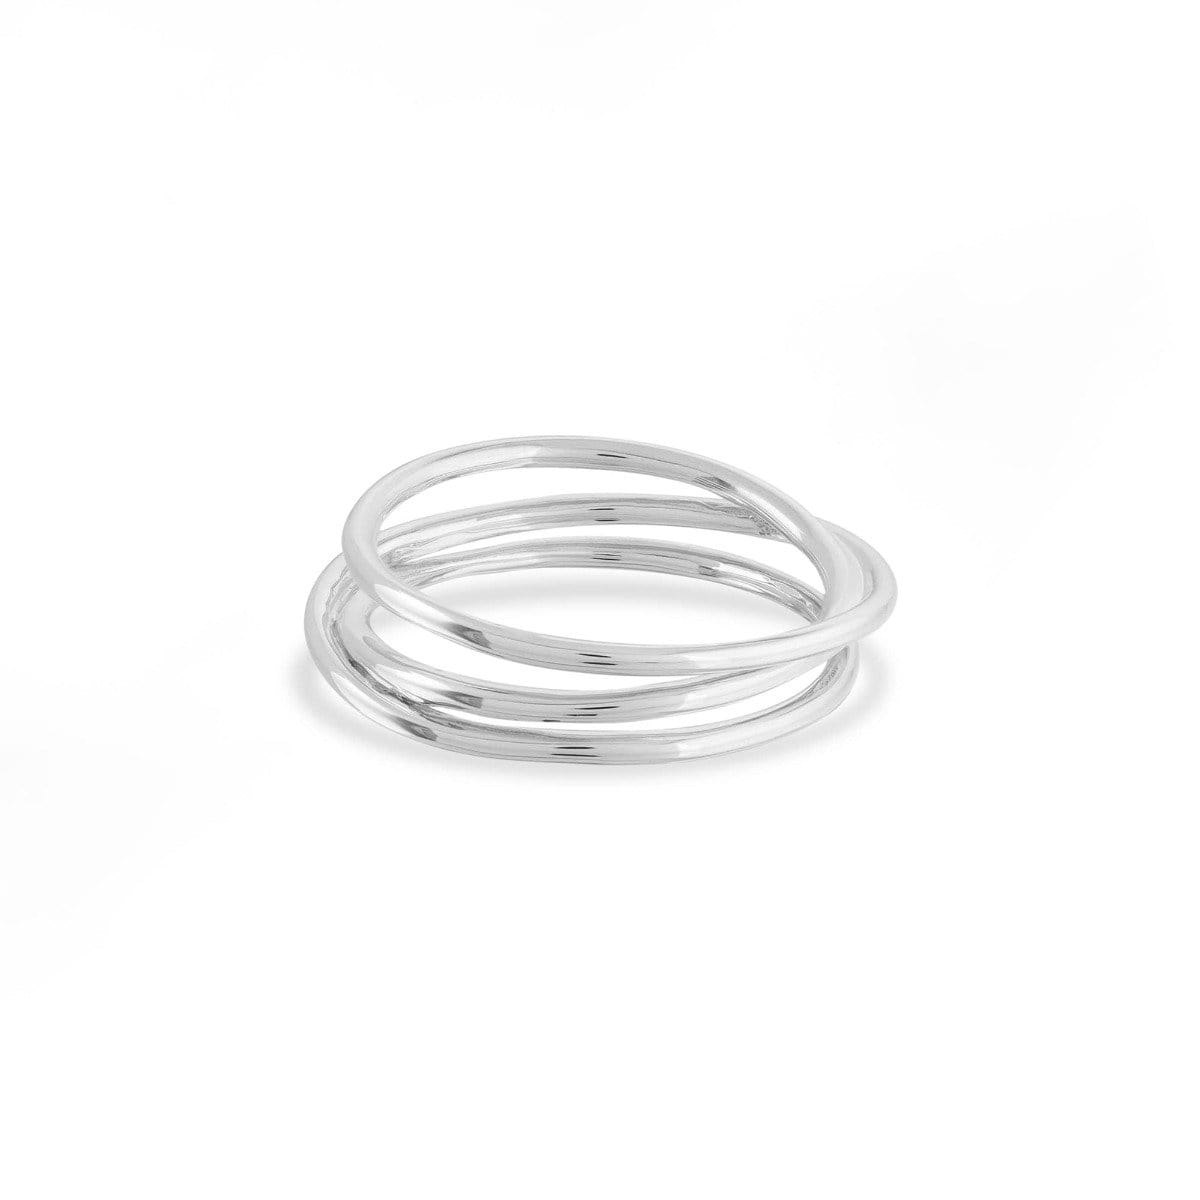 Boma Jewelry Rings 7 Trio Sterling Silver Ring